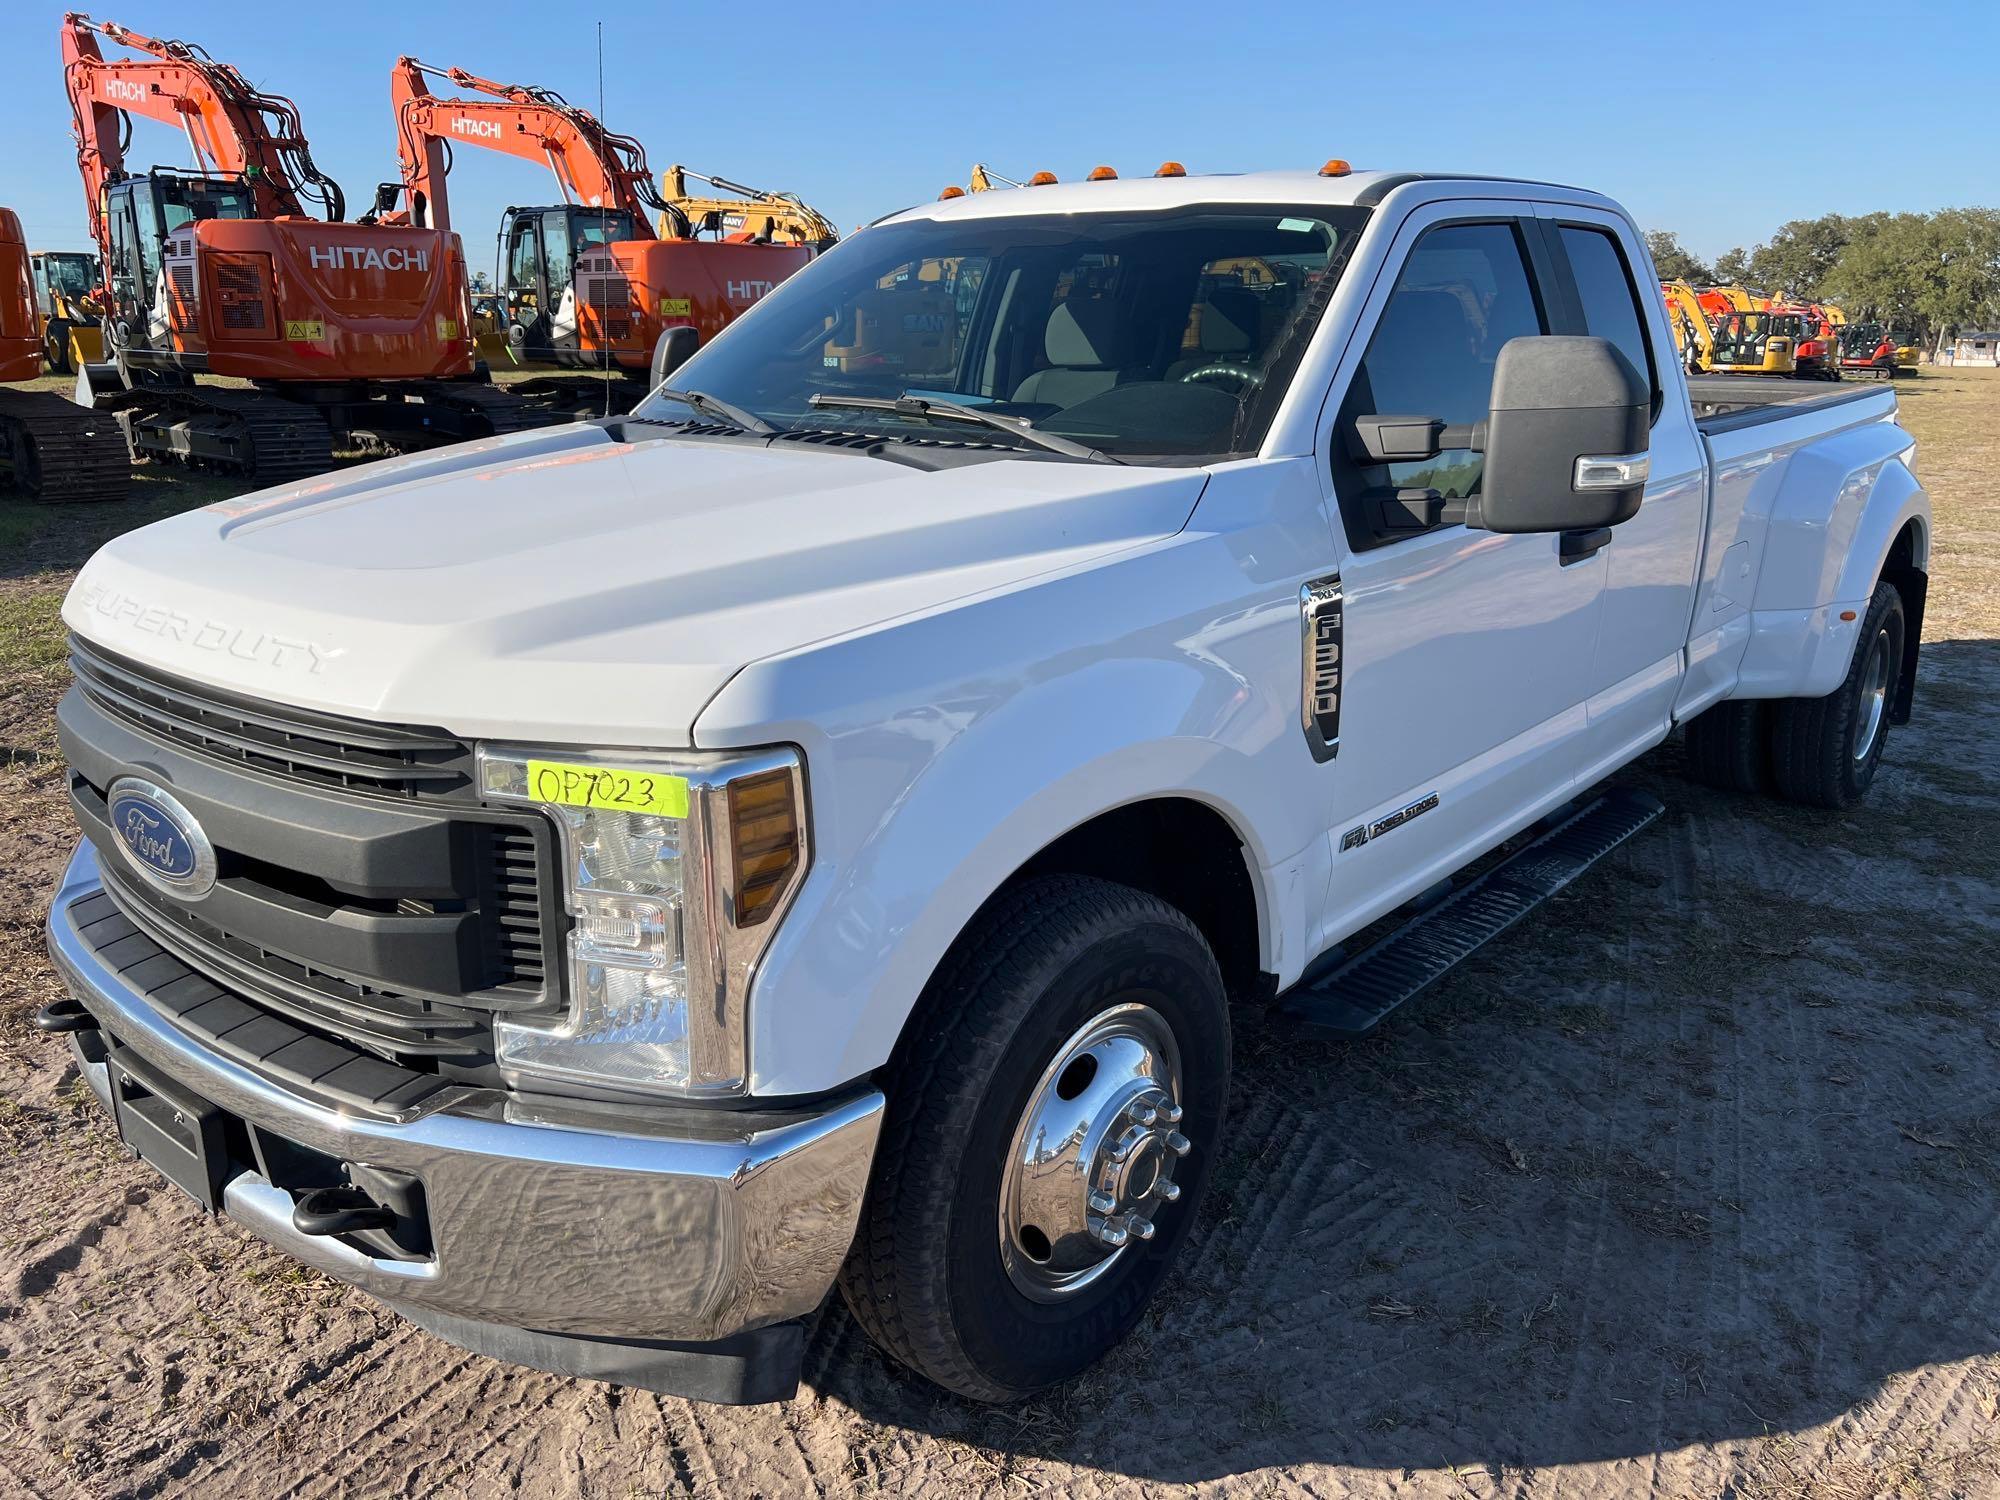 2018 FORD F350 PICKUP TRUCK VN:B32032 Powered By Power